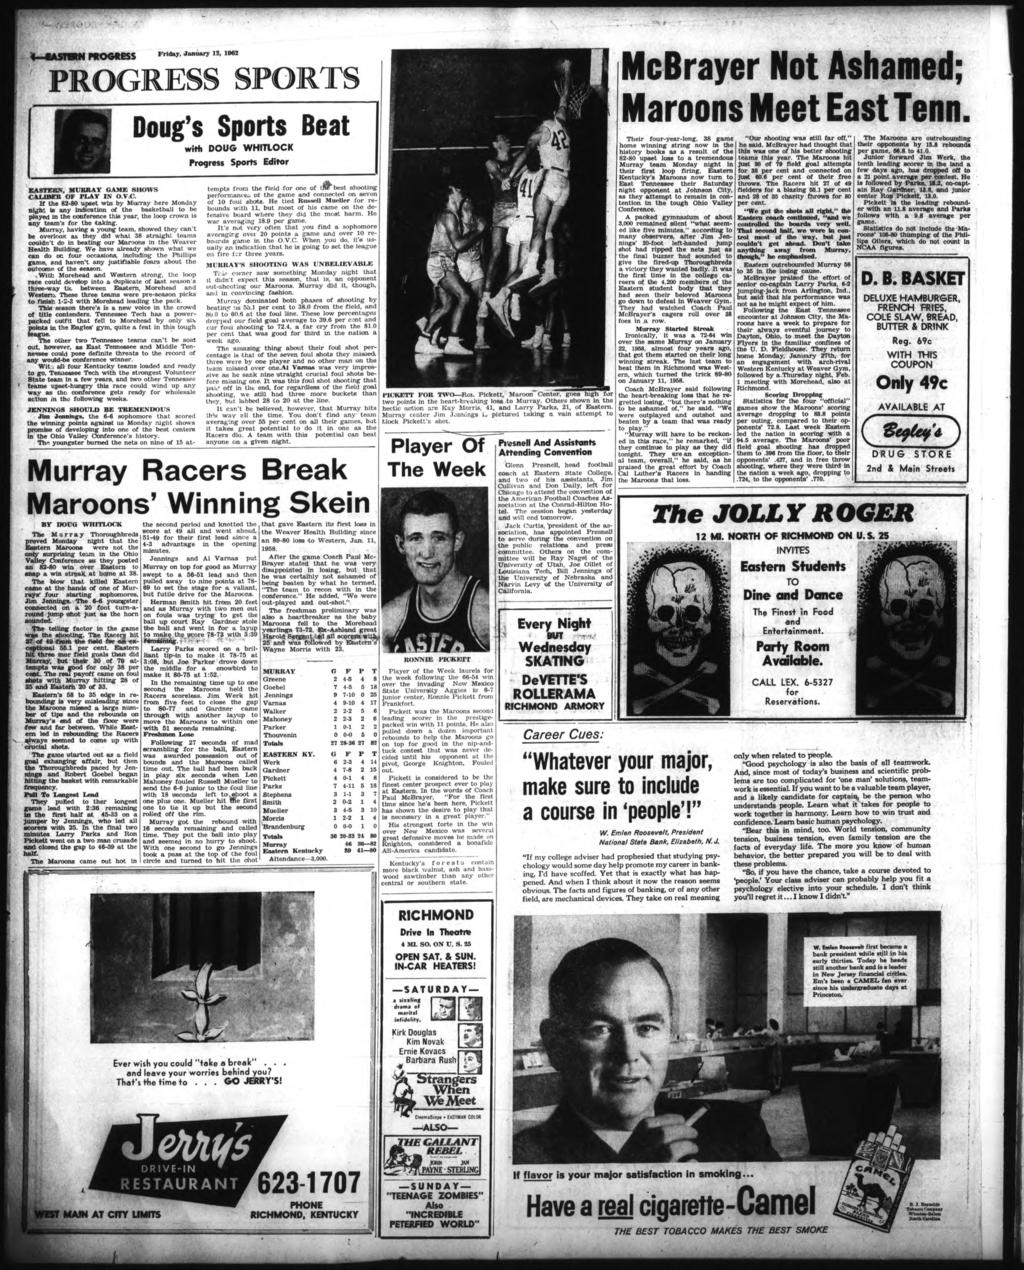 4 CASTWN PROGRESS Frday, January t, 1962 PROGRESS SPORTS EASTERN, MURRAY GAME SHOWS CALBER OF FLAT N O.V.C. f the 8280 upset wn by Murray here Monday nght s any ndcaton of the basketball to be played n the conference ths year, the loop crown s any teams for the takng.